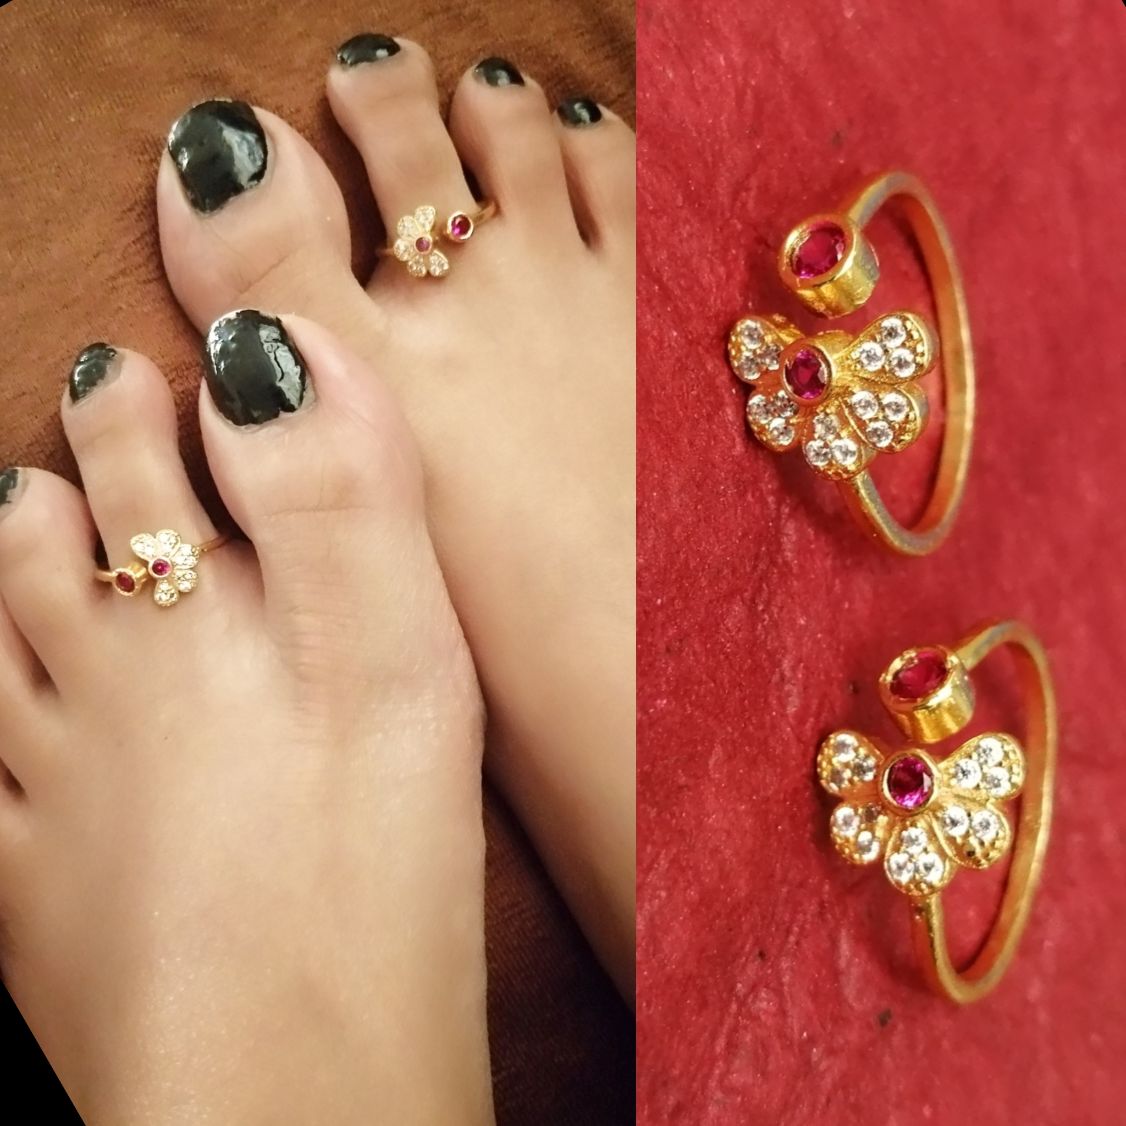 New launched and trandy women feet jewelry of silver toe rings design 2020  - YouTube | Toe ring designs, Toe rings, Silver toe rings